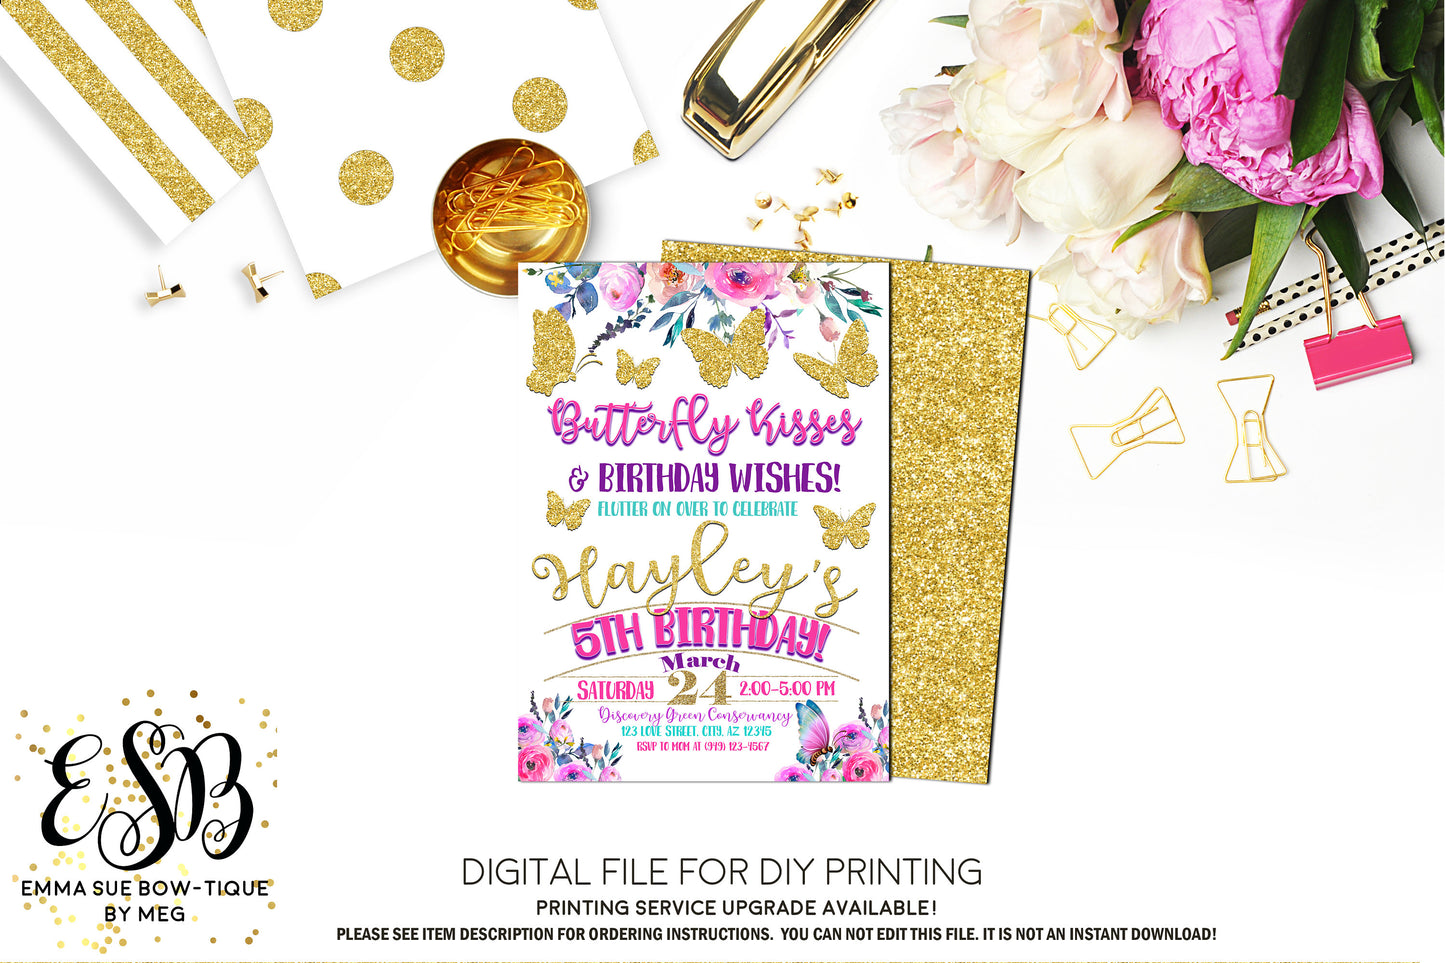 Butterfly Kisses & Birthday Wishes - Kid's Birthday Party Invitation Printable - Digital File  (Butterfly-kisses)